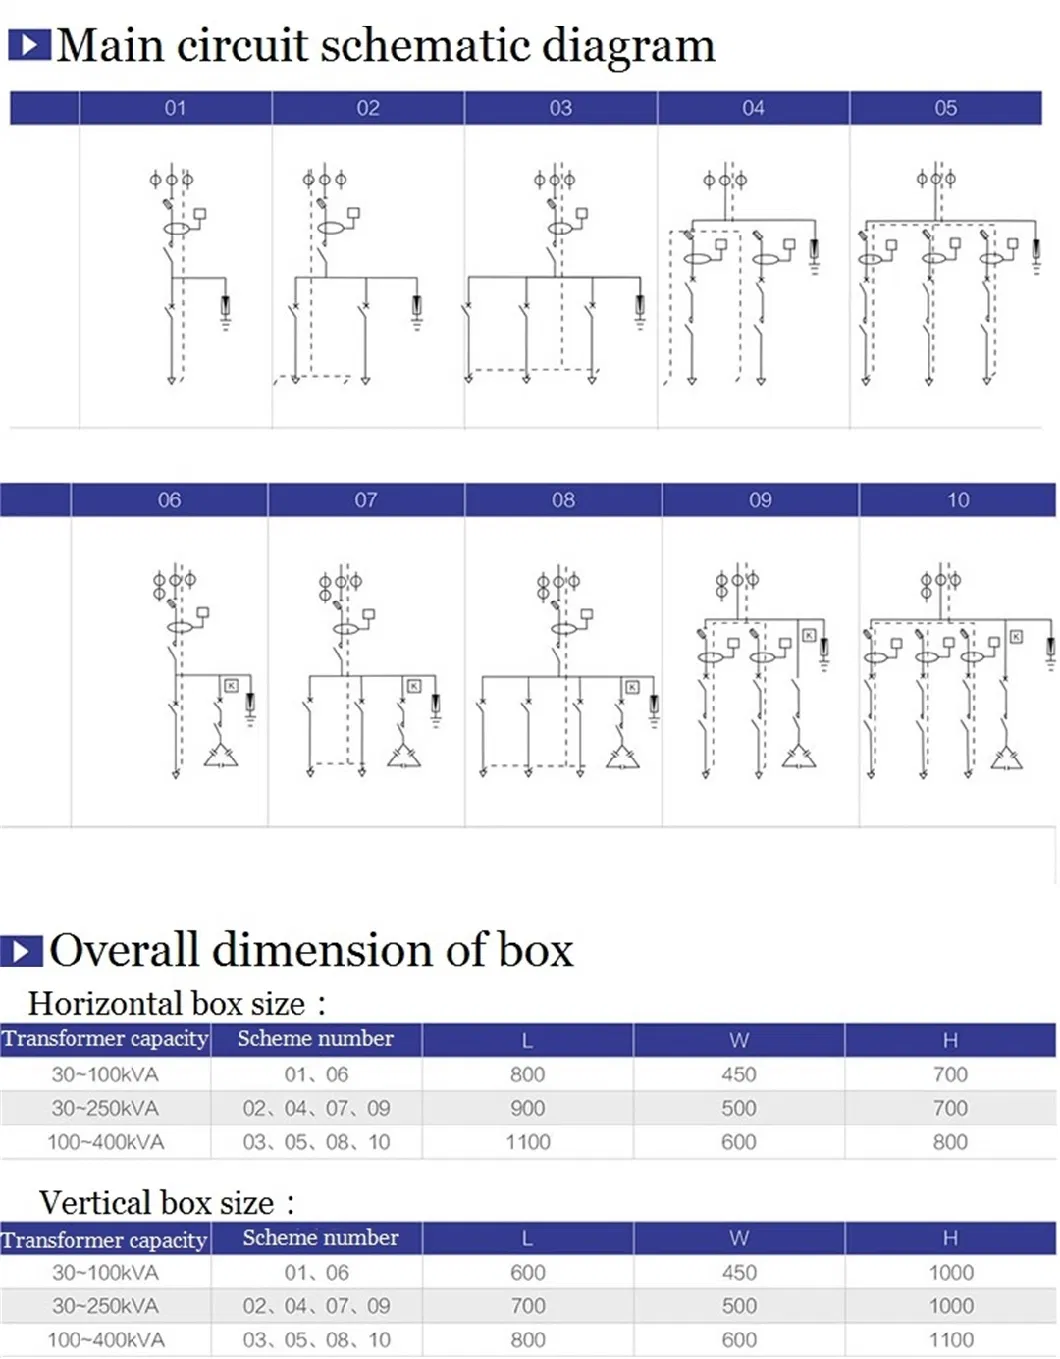 Jp 400V 630A 30-400kVA Low Voltage Integrated Distribution Box Electrical Box (Compensation/Control/Terminal/Lighting)